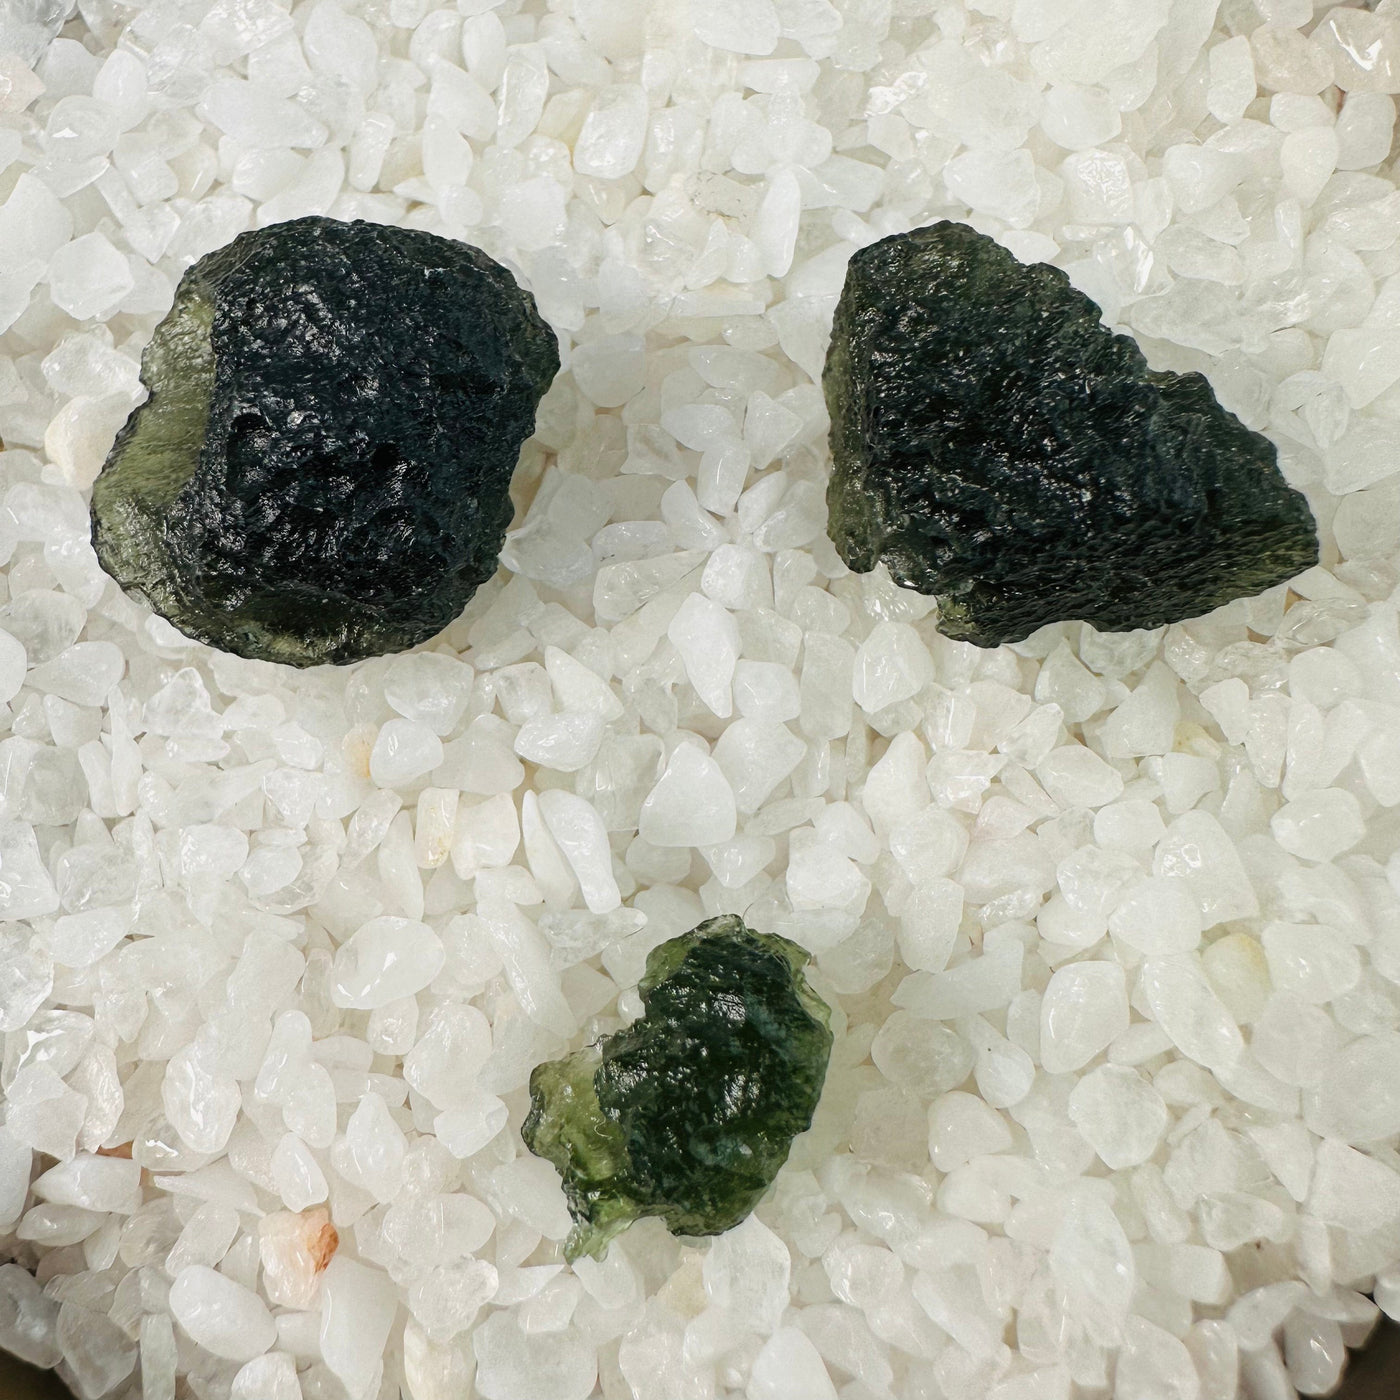 Three different sized Moldavite pieces displayed on top of crystal quartz chips.